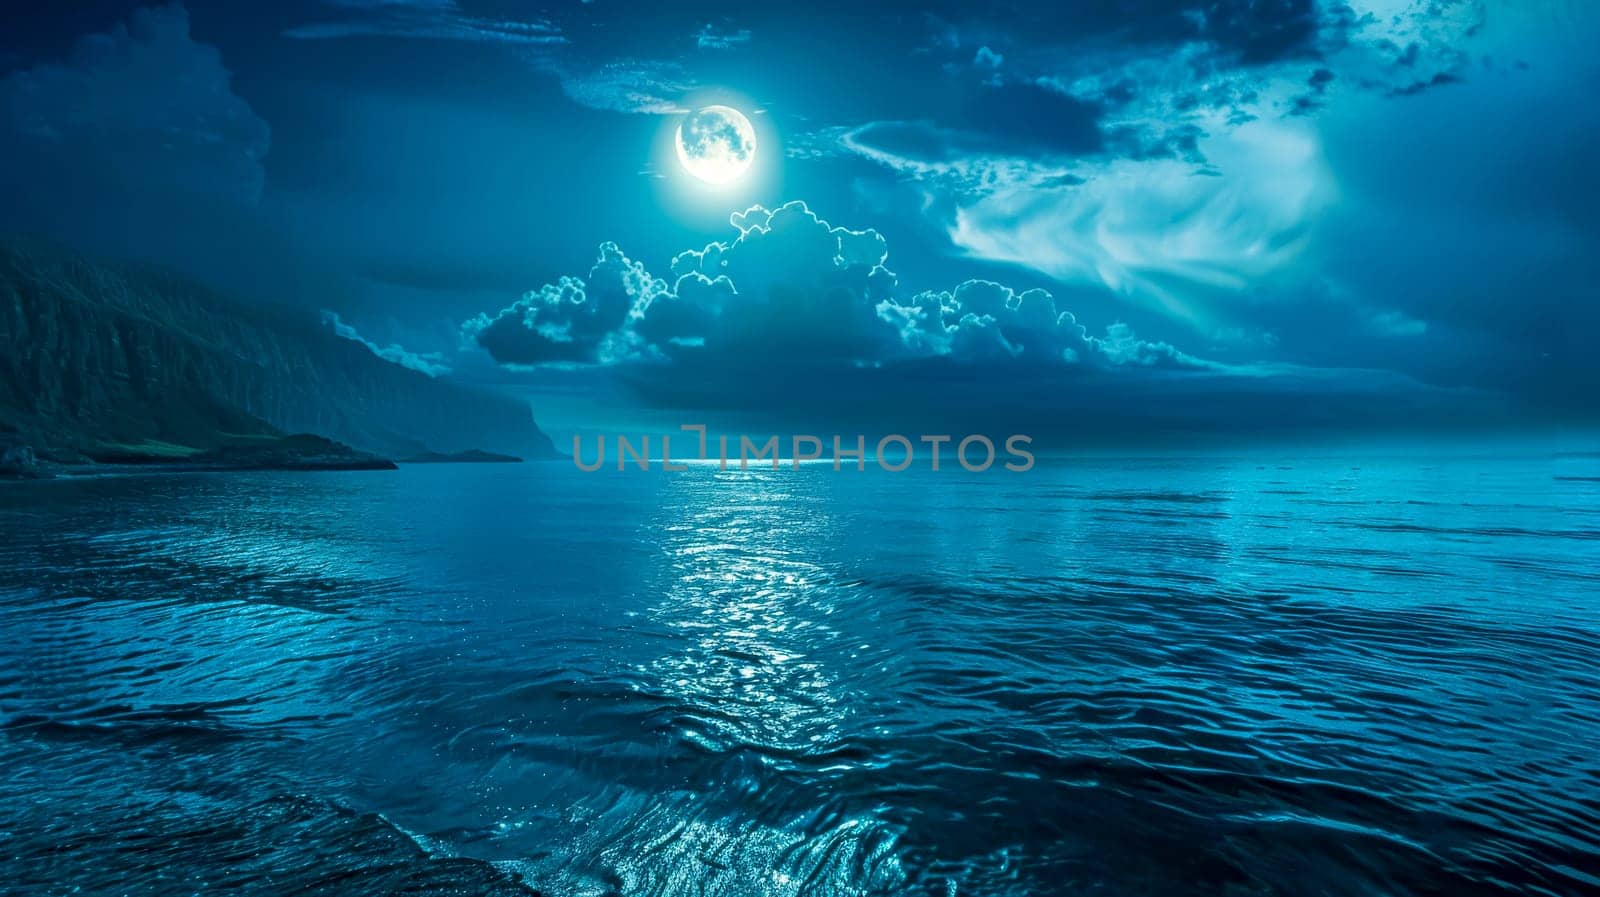 Surreal blue night scene with full moon over calm ocean waters